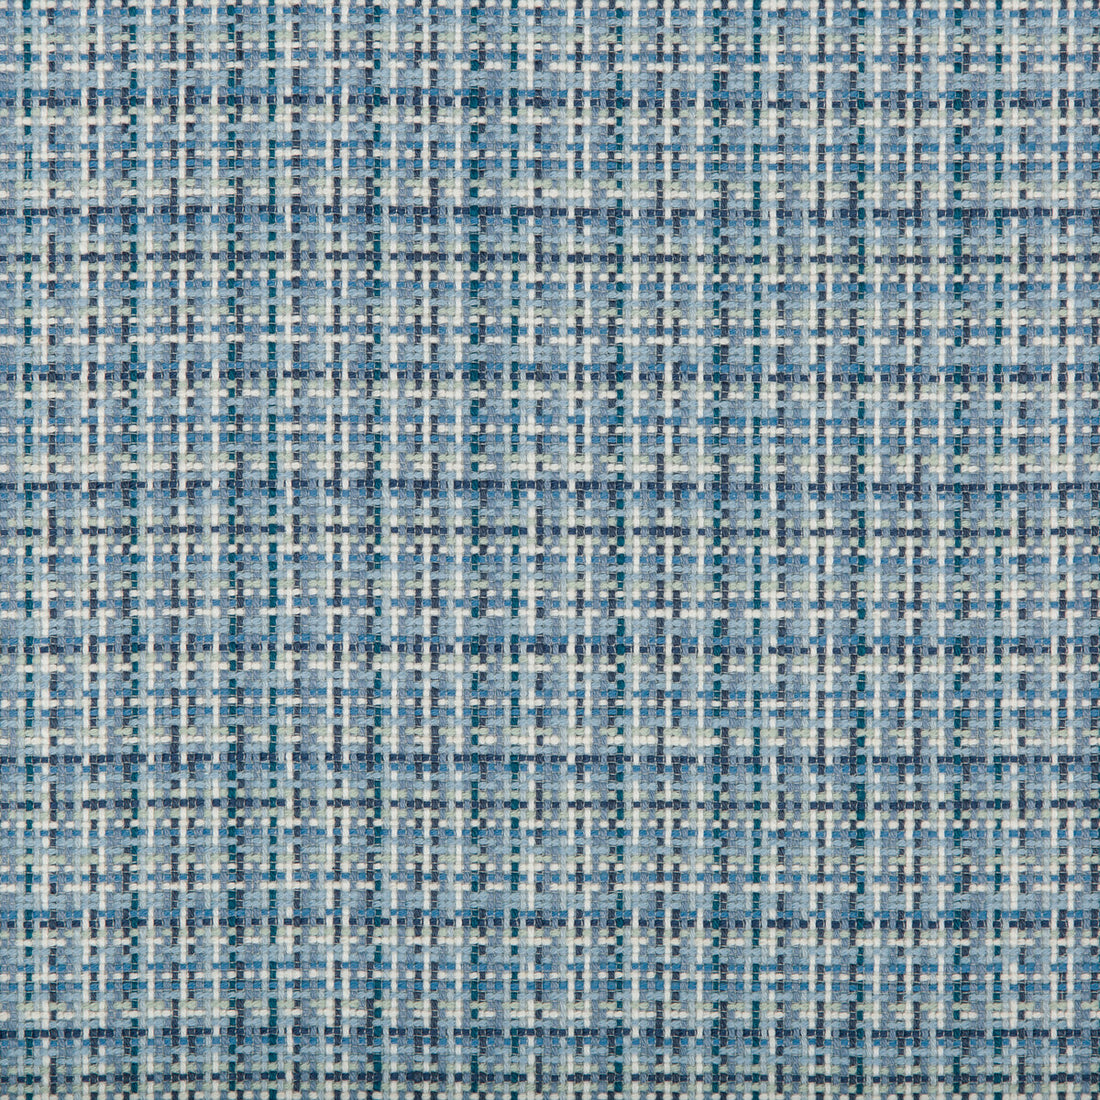 Kf Bas fabric - pattern 35537.5.0 - by Kravet Basics in the Bermuda collection